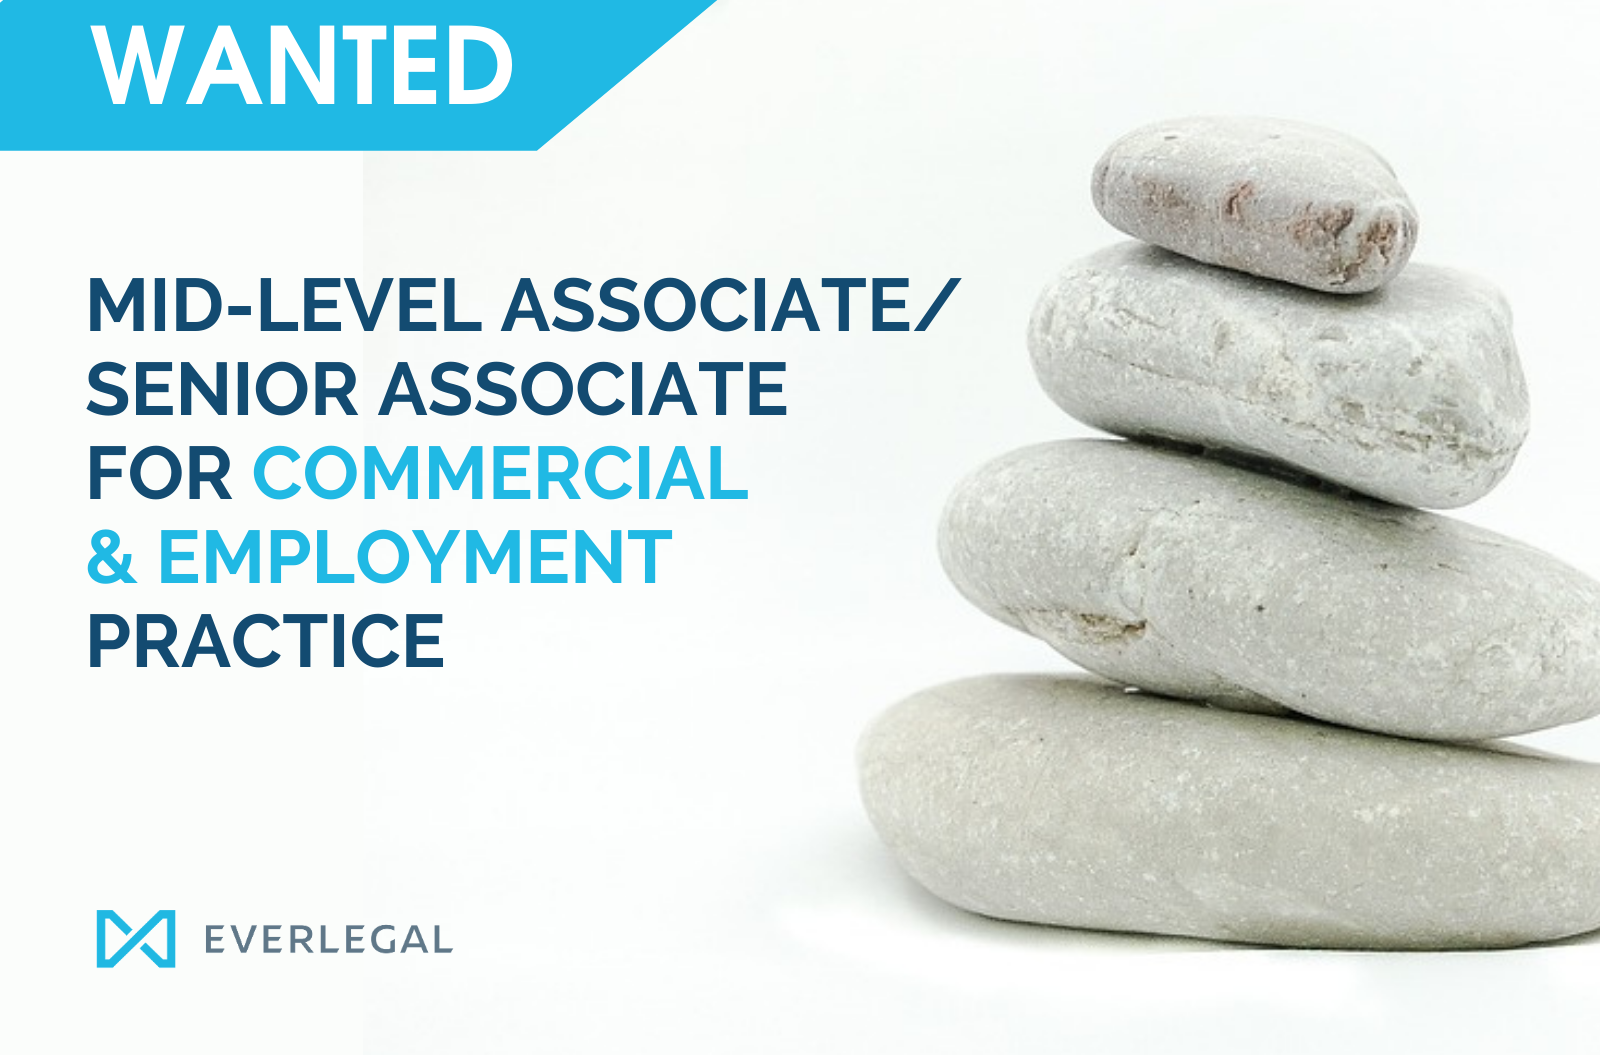 EVERLEGAL is looking for a Mid-level Associate/Senior Associate to join Commercial & Employment practice